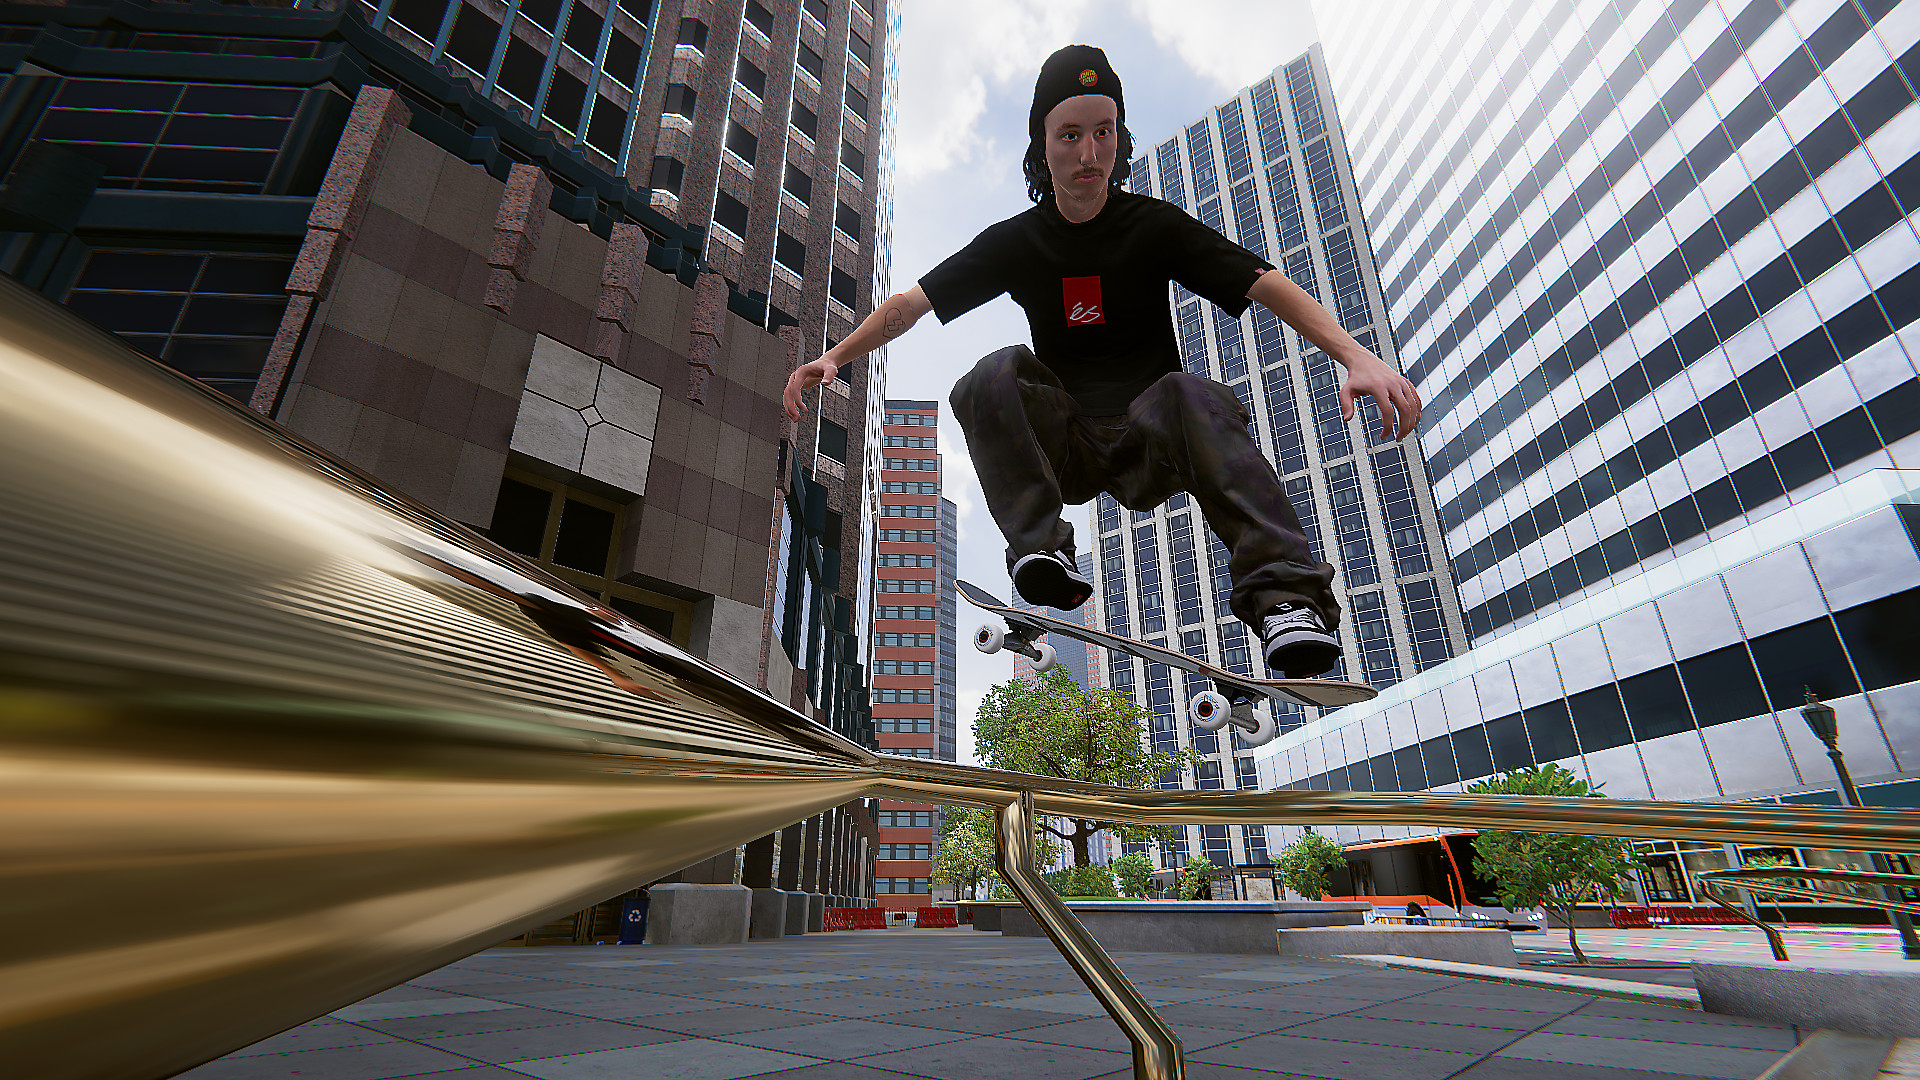 new skate game ps4